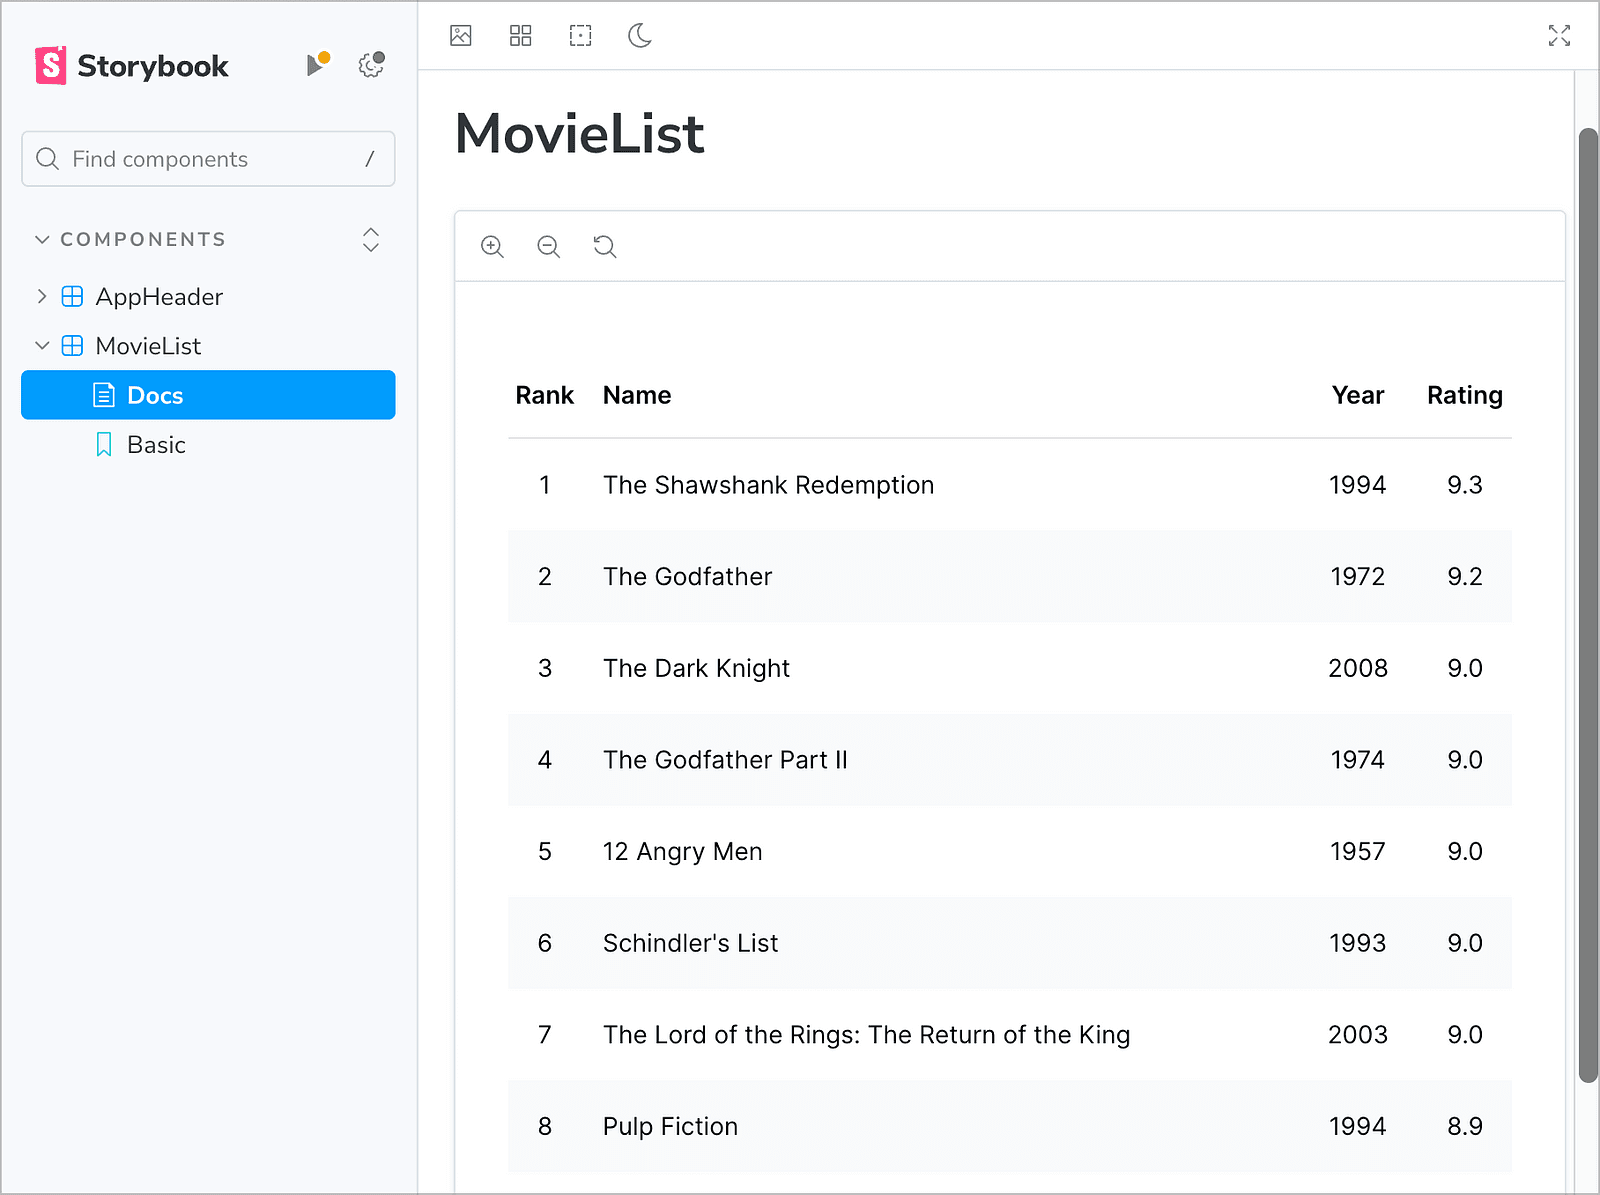 The MovieList component in Storybook